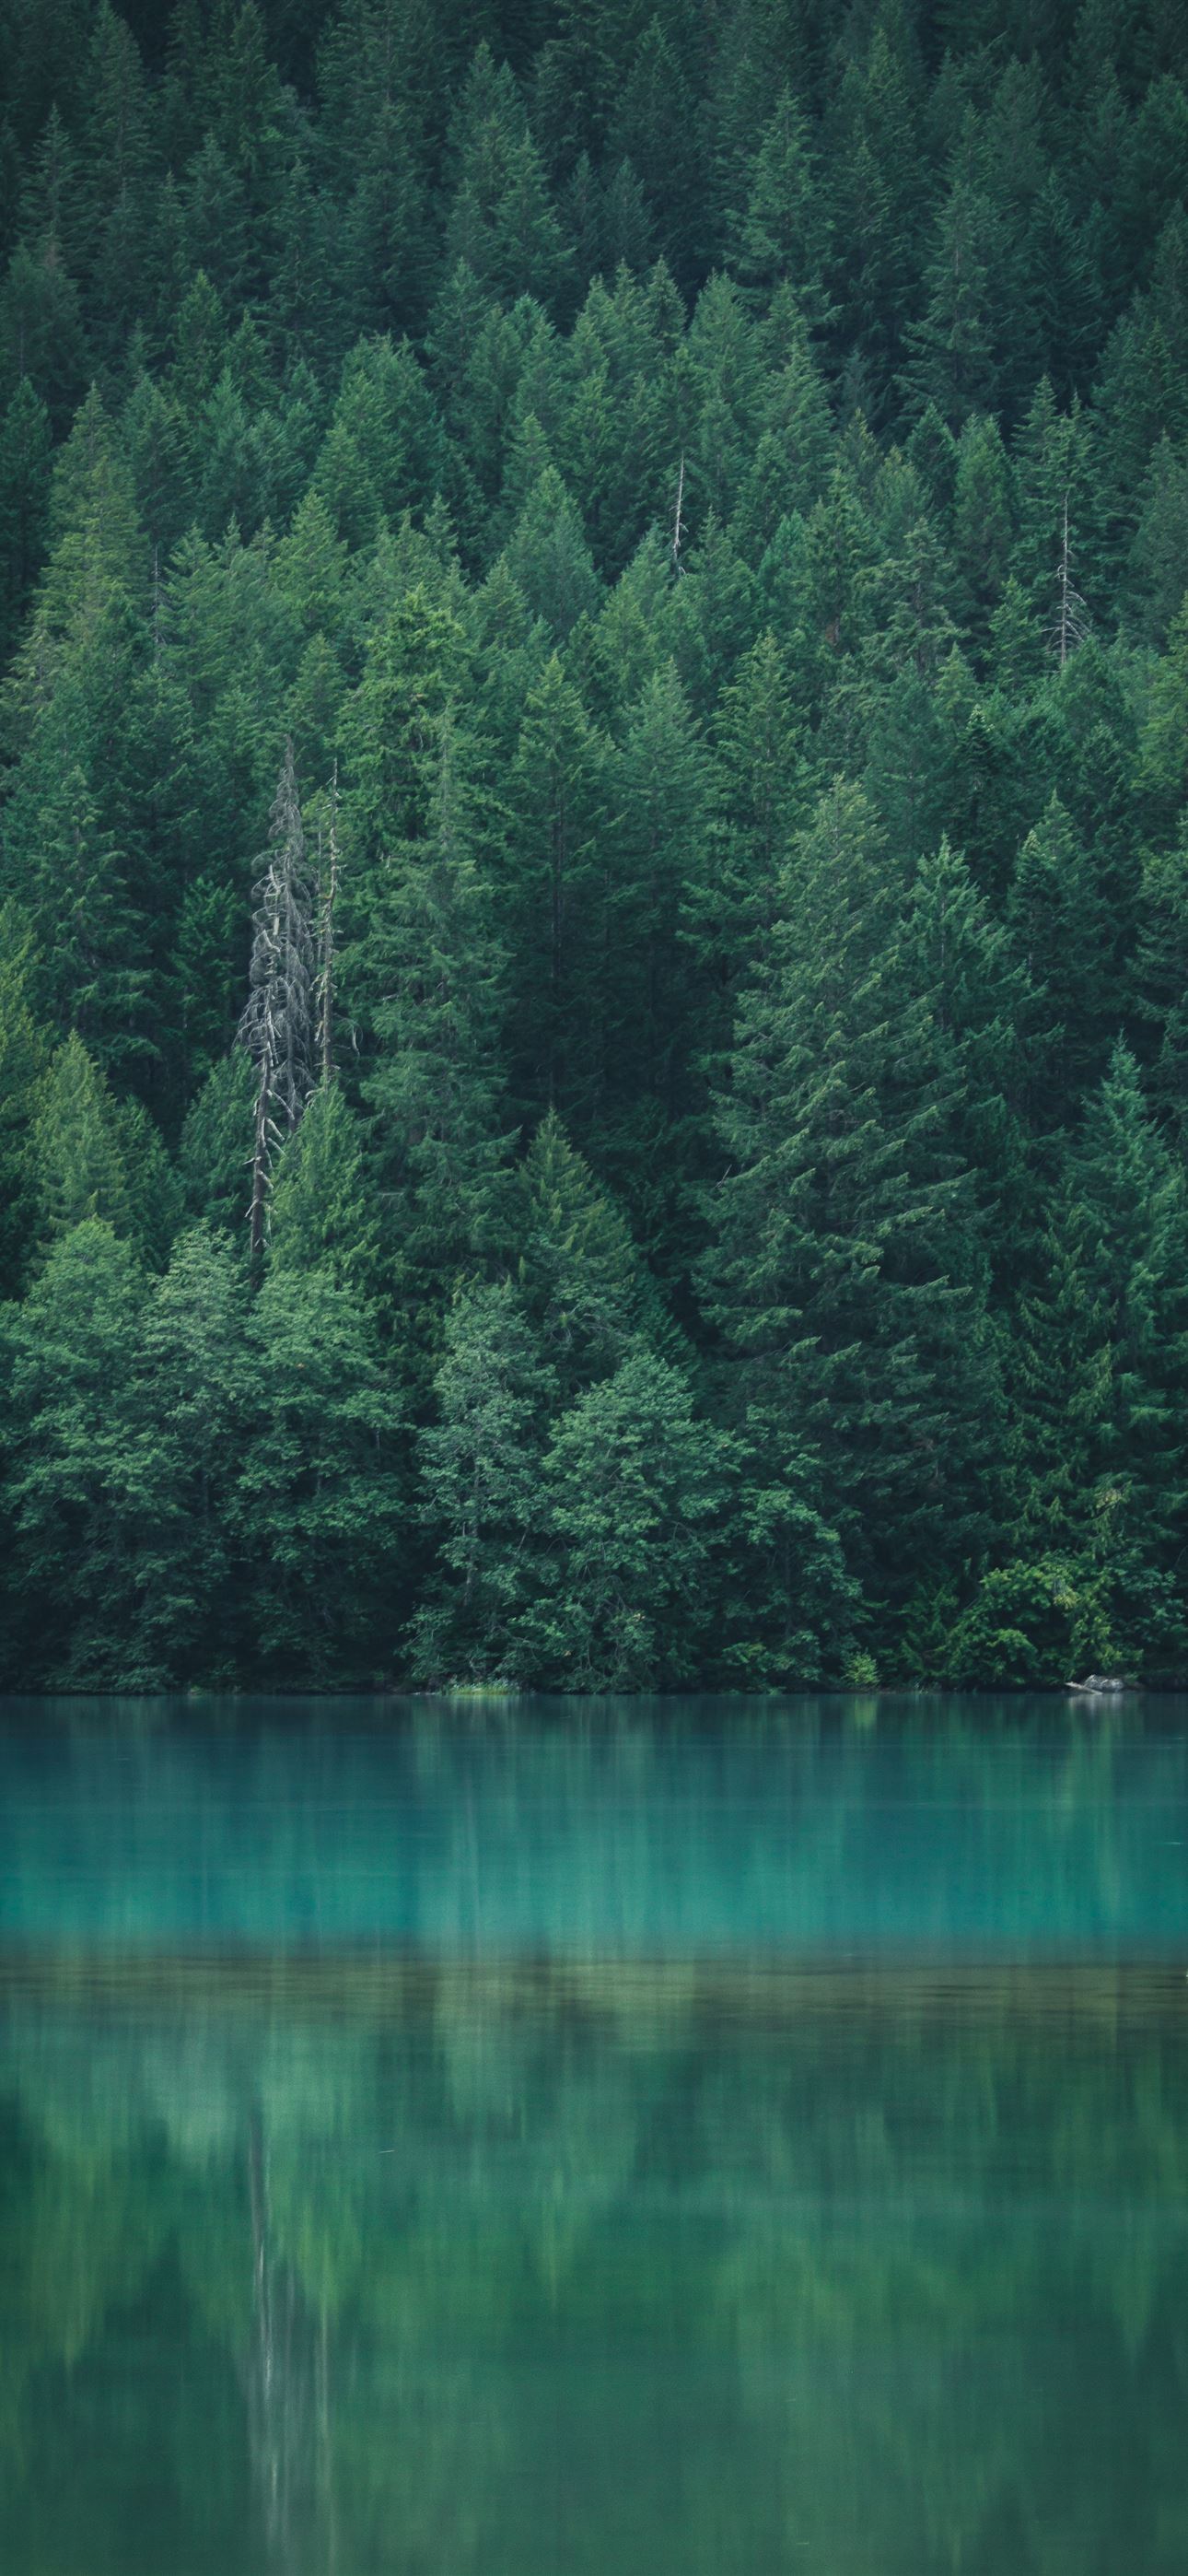 Forest Reflection At Diablo Lake Iphone Wallpapers Free Download